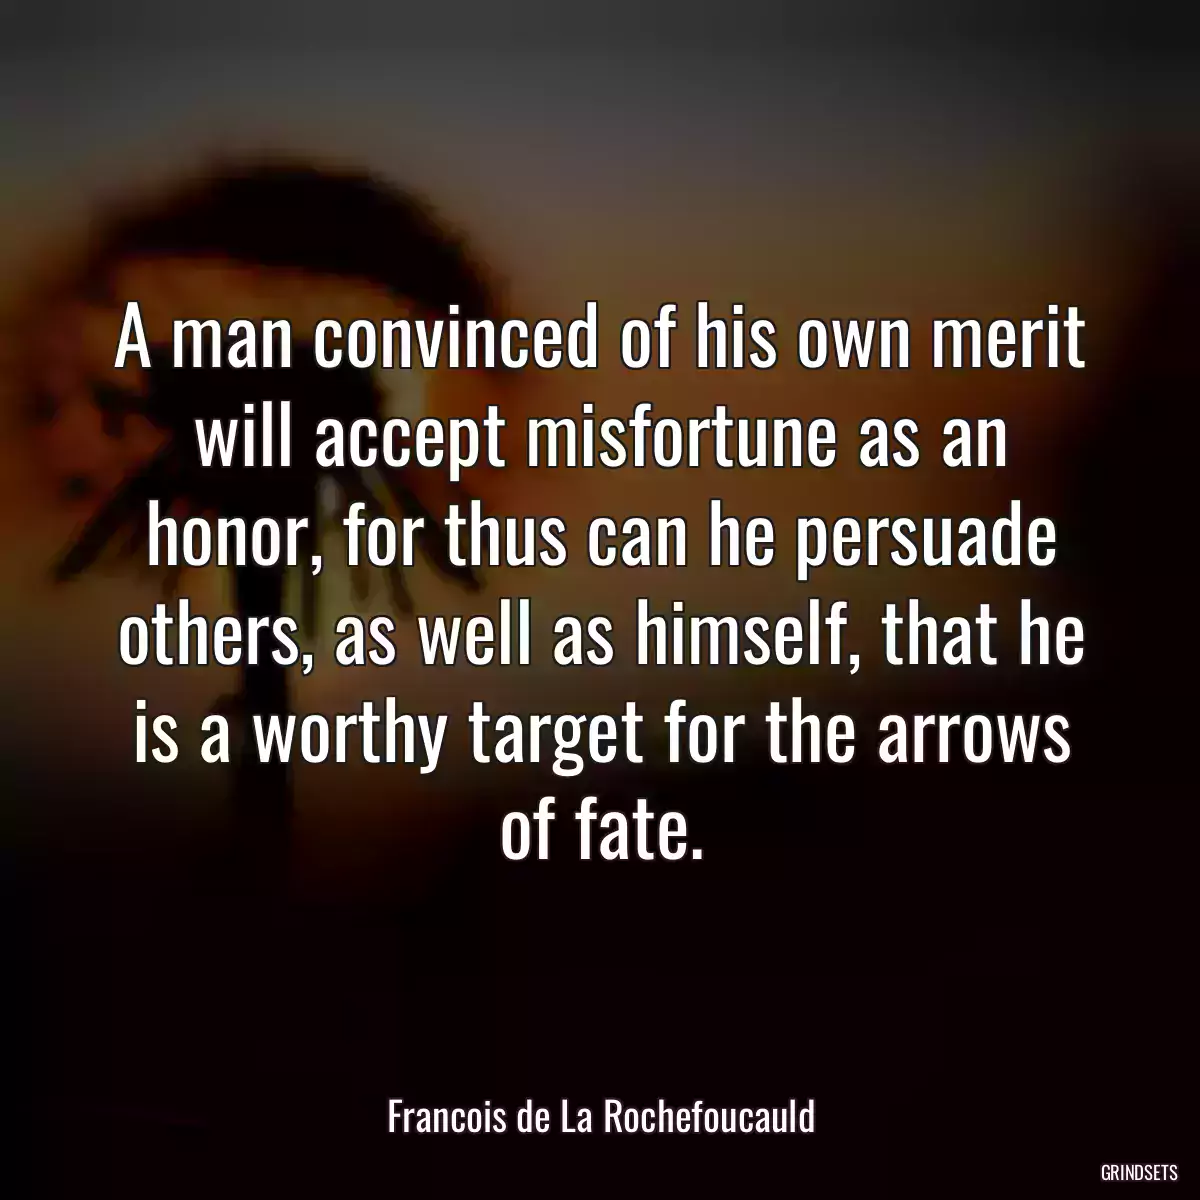 A man convinced of his own merit will accept misfortune as an honor, for thus can he persuade others, as well as himself, that he is a worthy target for the arrows of fate.